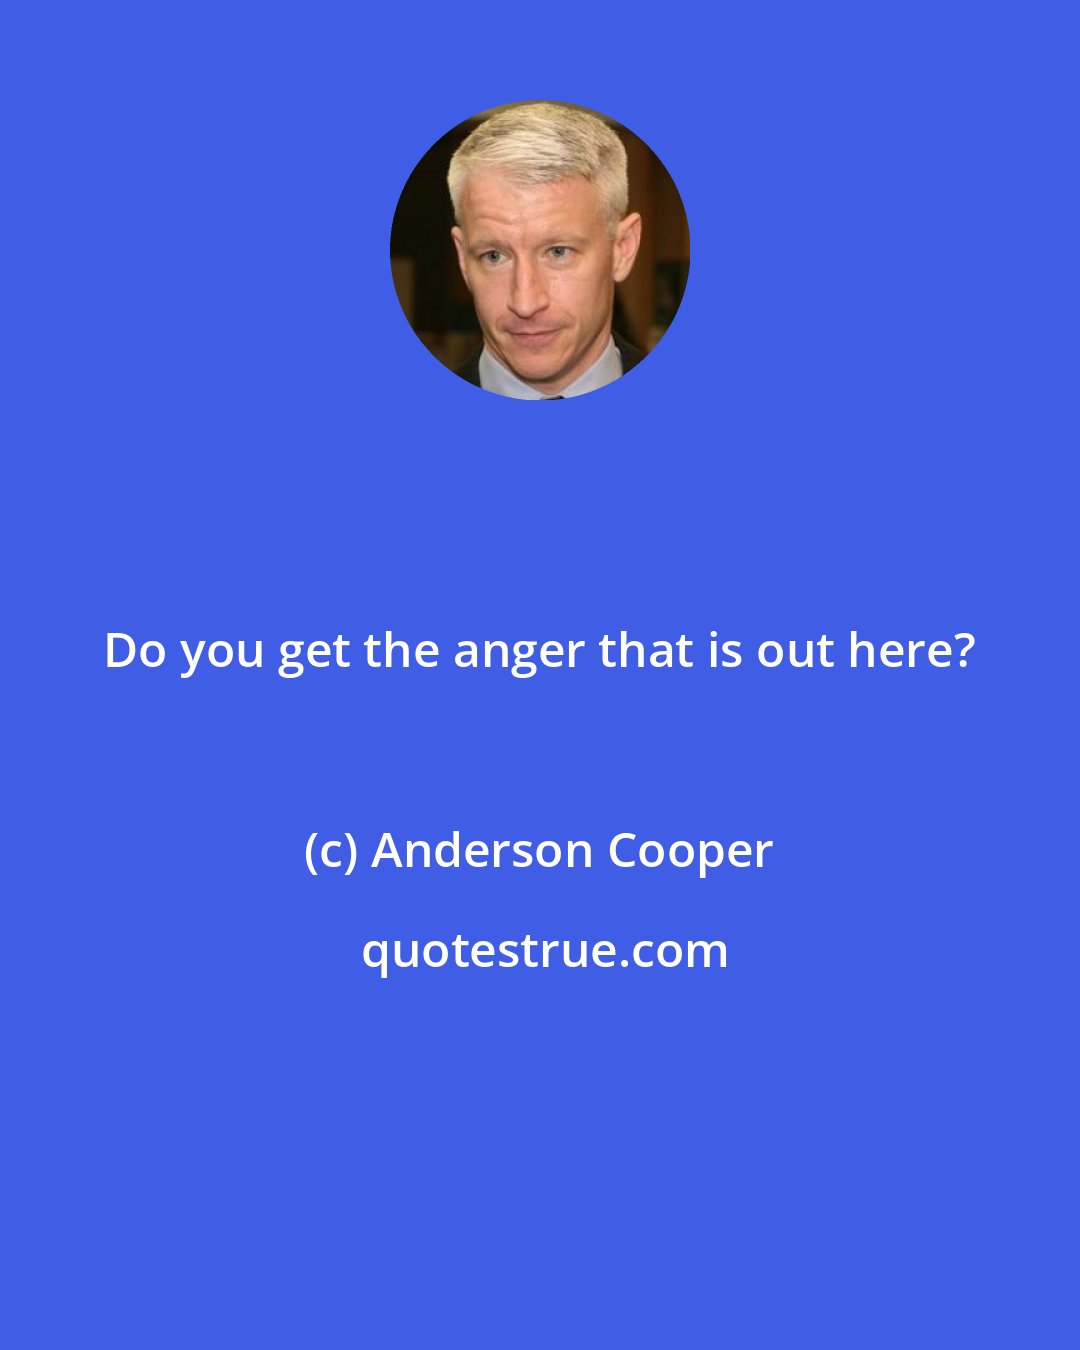 Anderson Cooper: Do you get the anger that is out here?